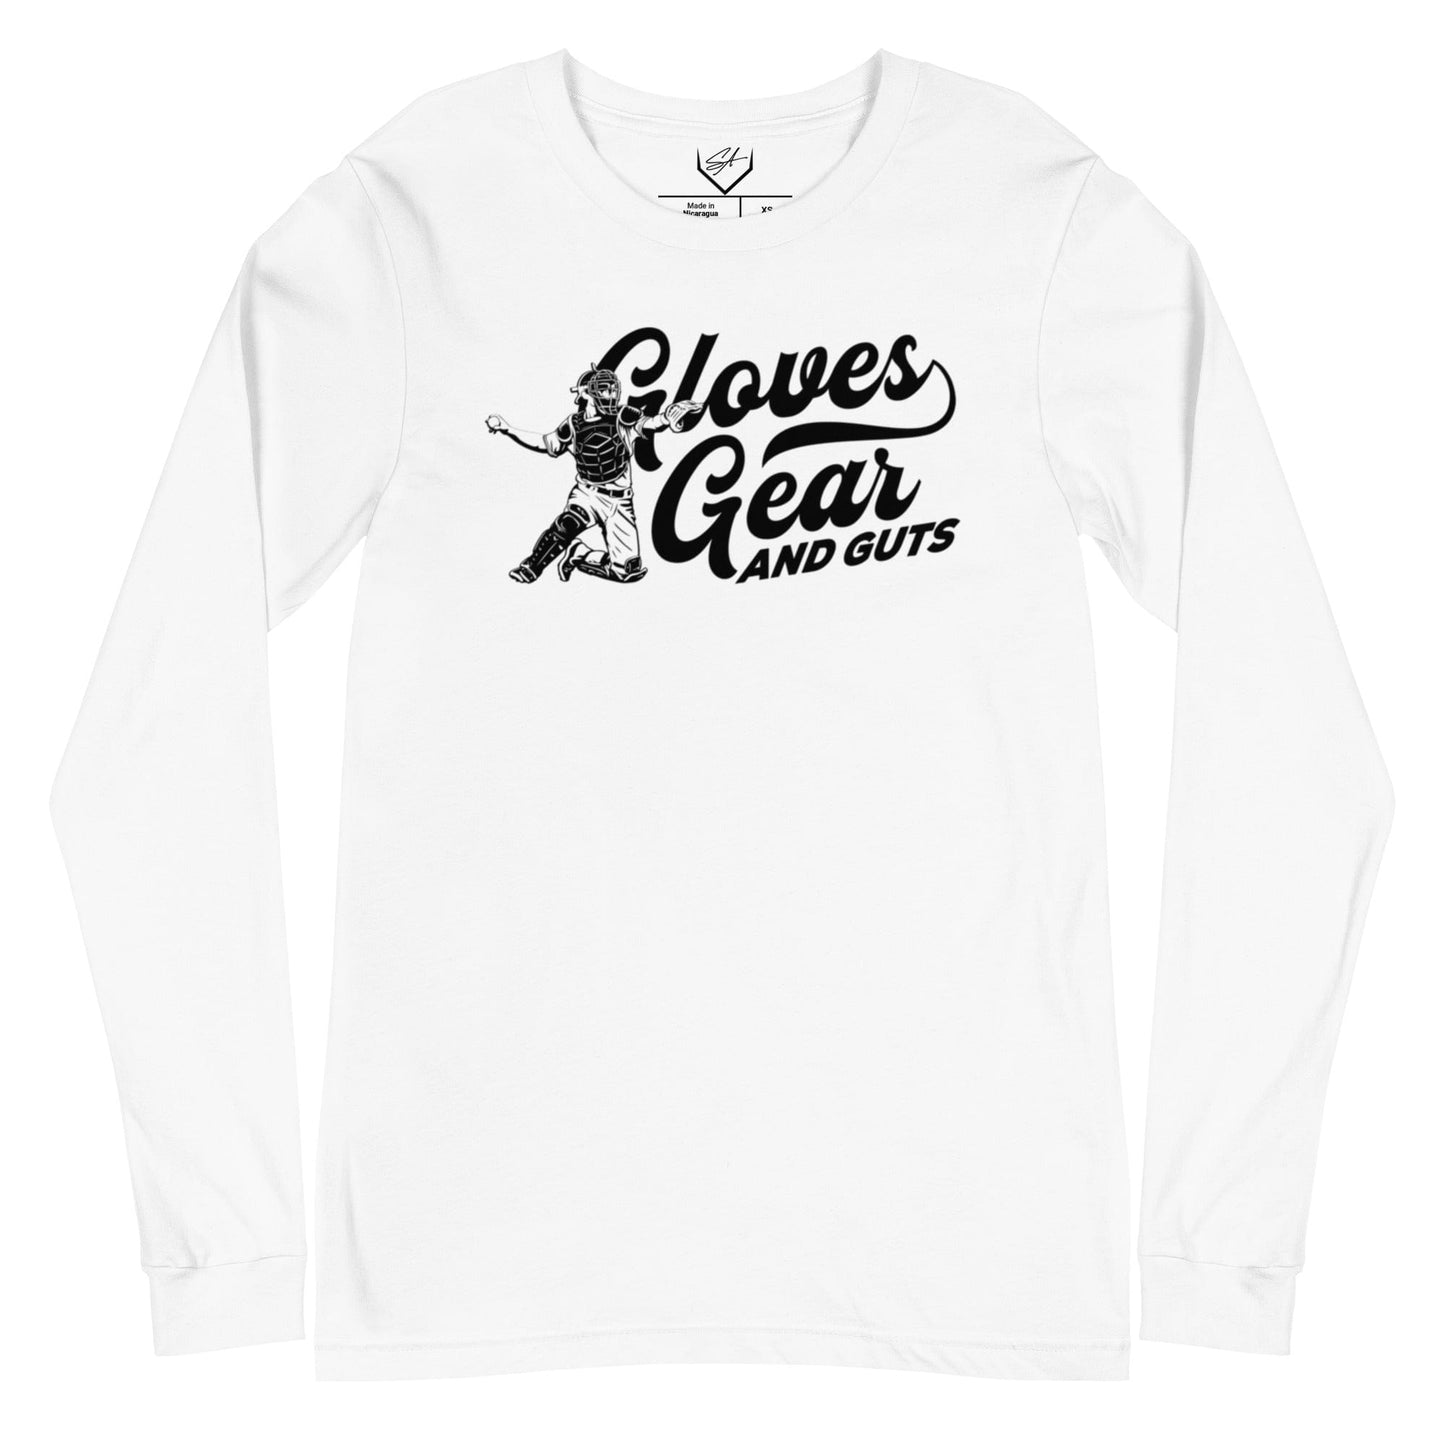 Gloves Gear And Guts - Adult Long Sleeve